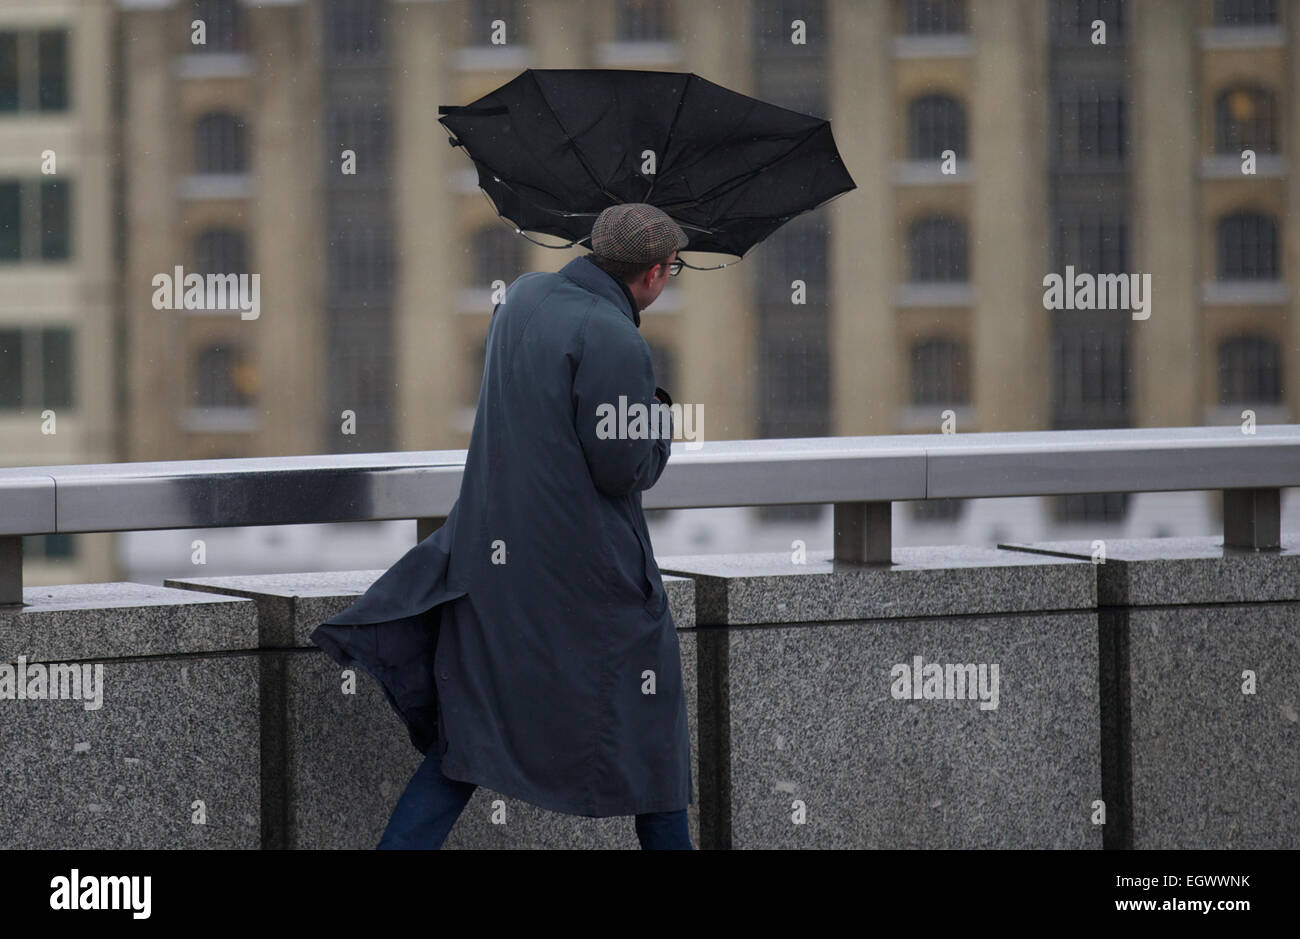 UNITED KINGDOM, London : A man battles the high winds with her umbrella as he walks across a bridge in central London on February 12, 2014. Stock Photo